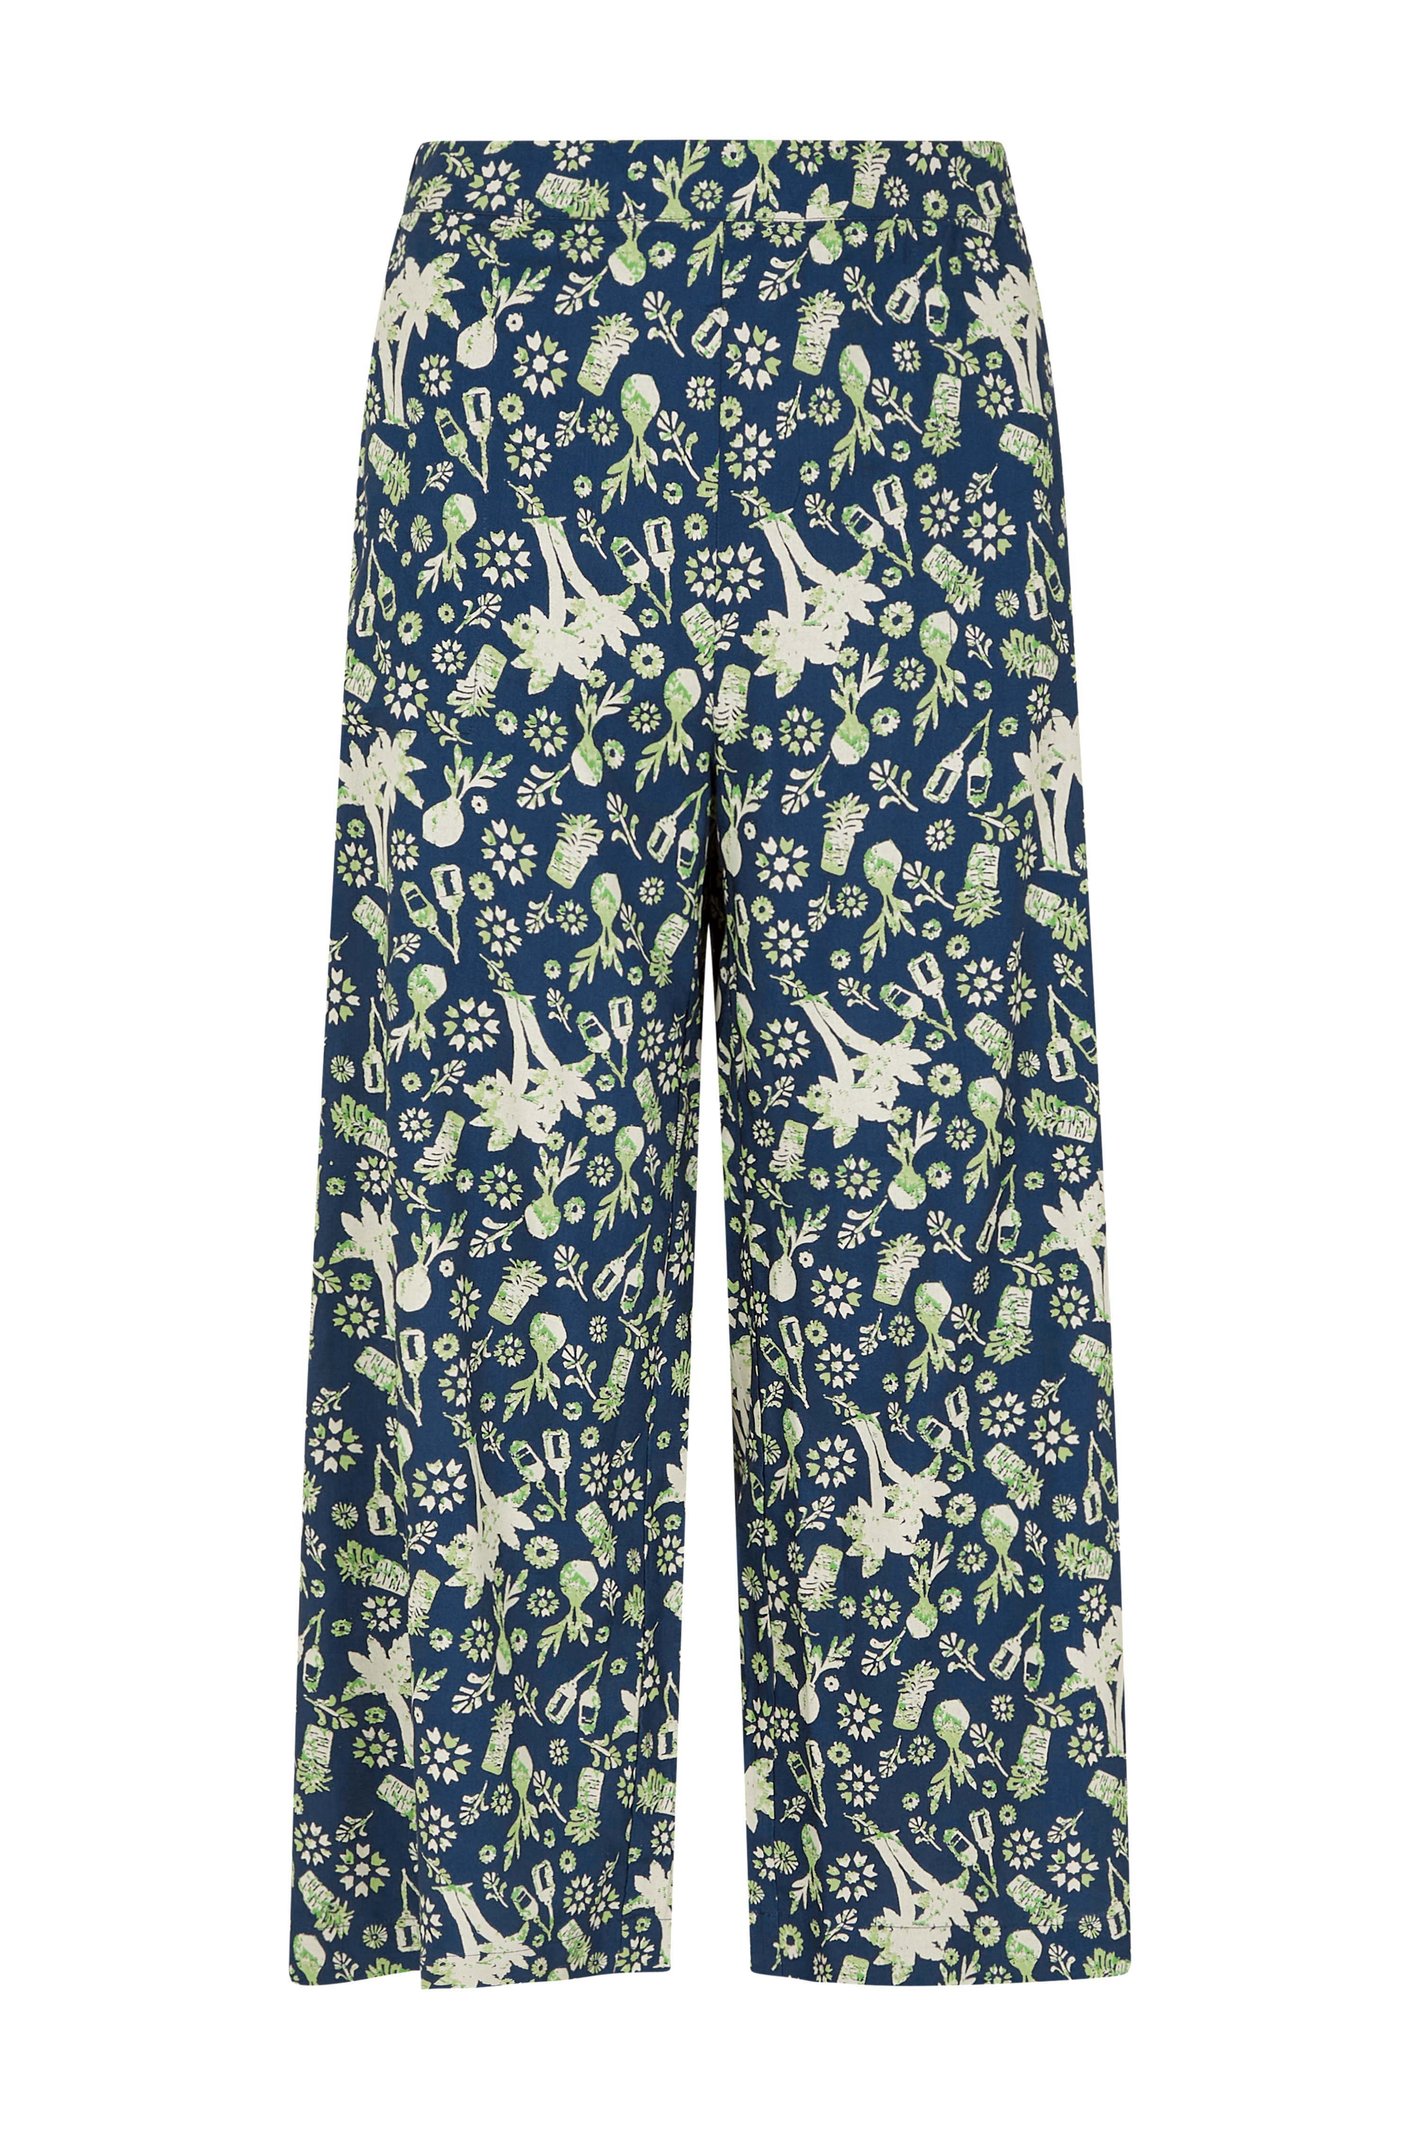 Weird Fish Tresco Eco Viscose Printed Wide Leg Cropped Trousers Ensign Blue Size 20